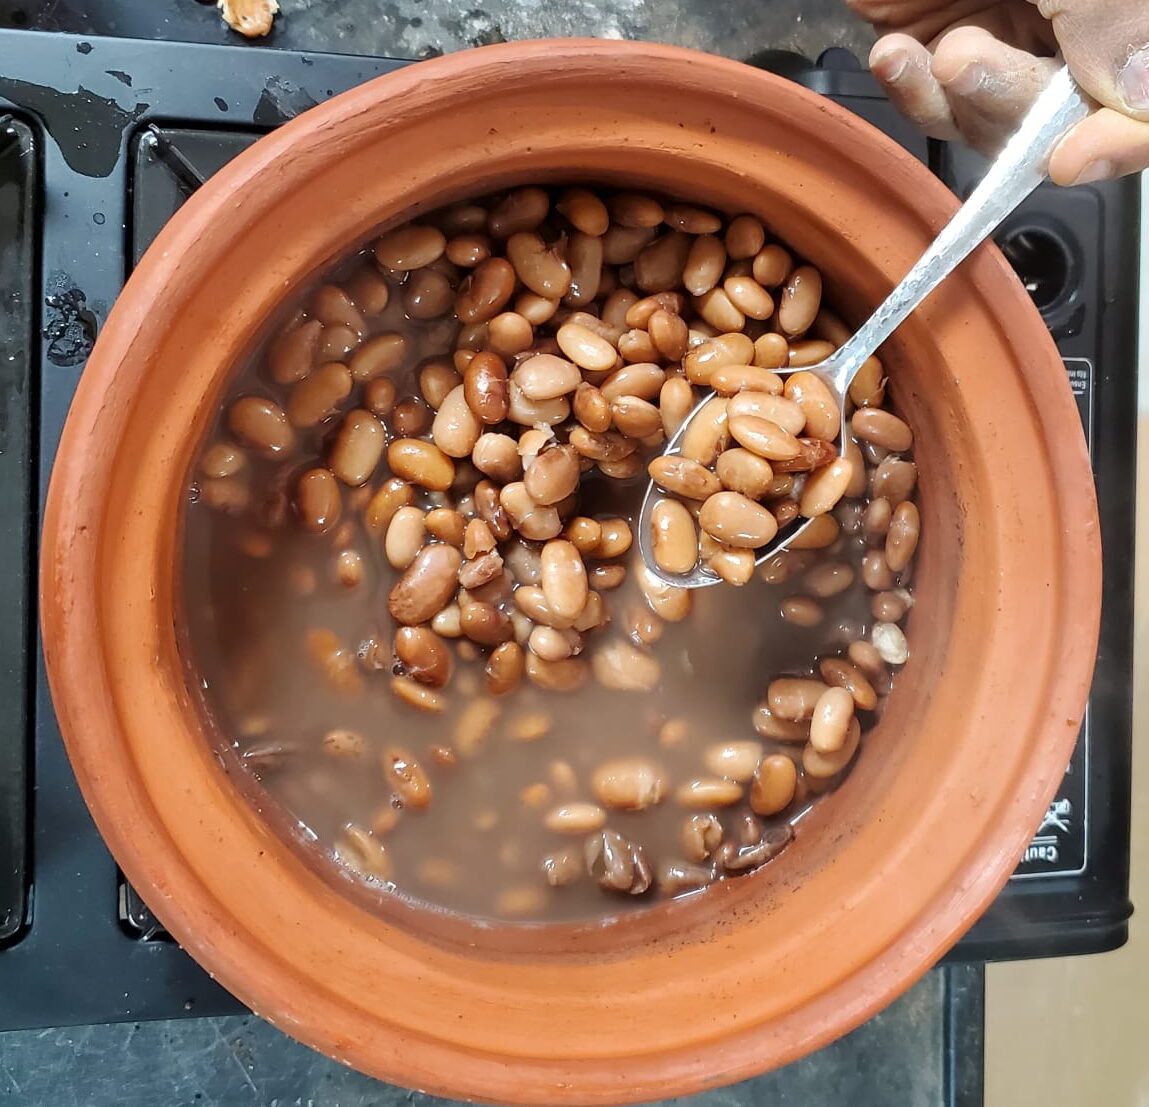 Best way to cook beans and lentils to maintain nutrition and eliminate the anti-nutrients